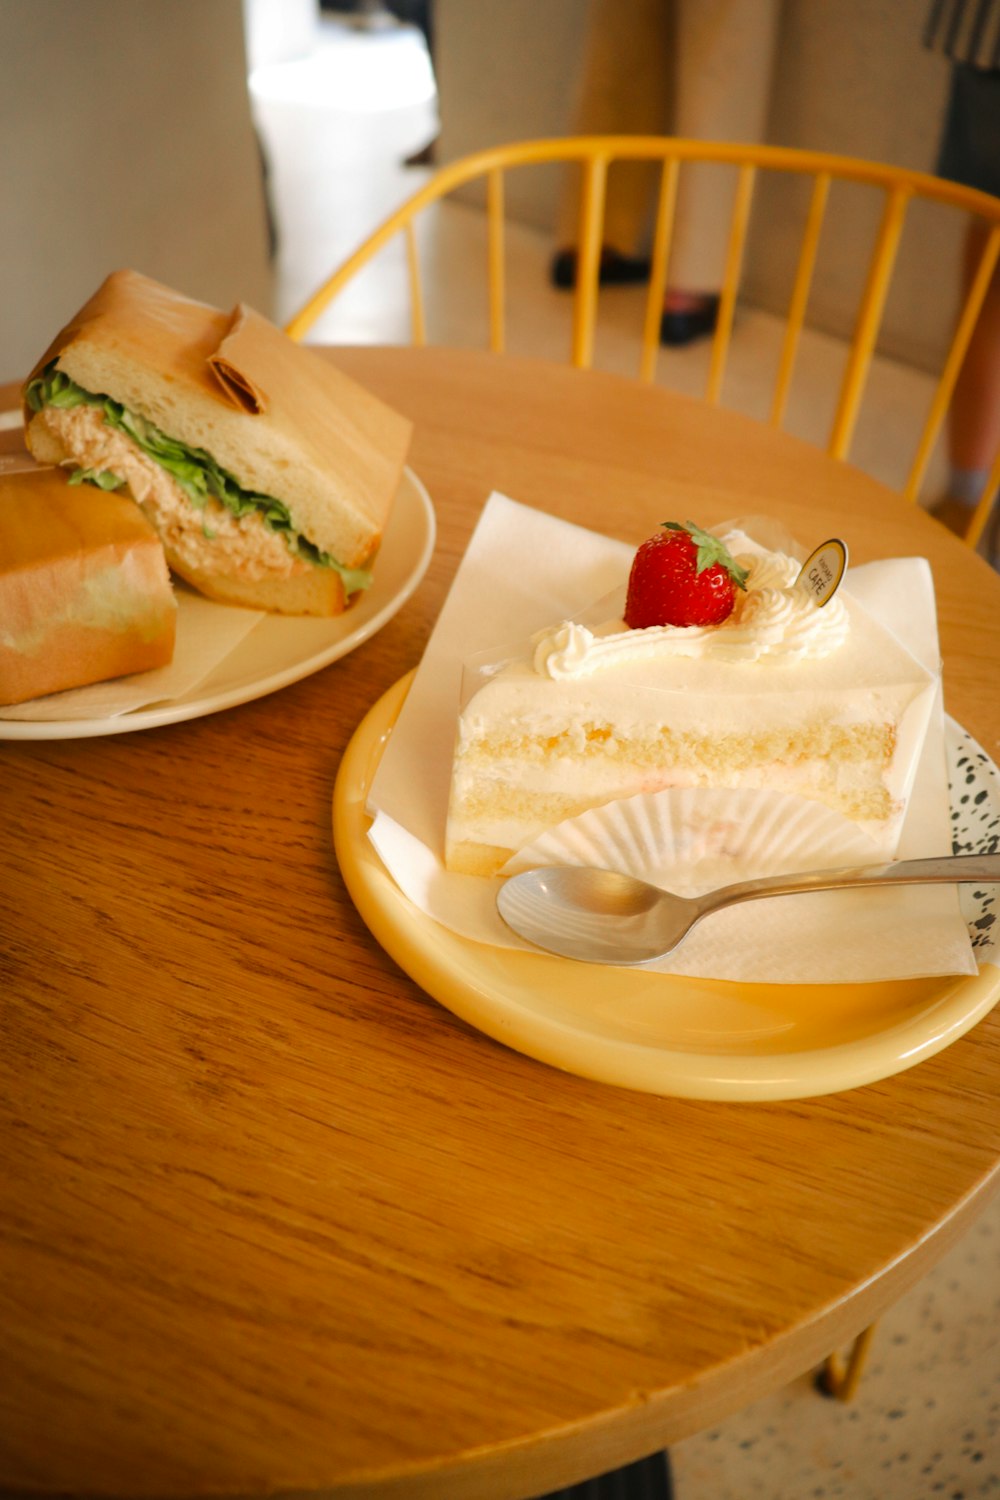 a plate with a sandwich and a cupcake on it